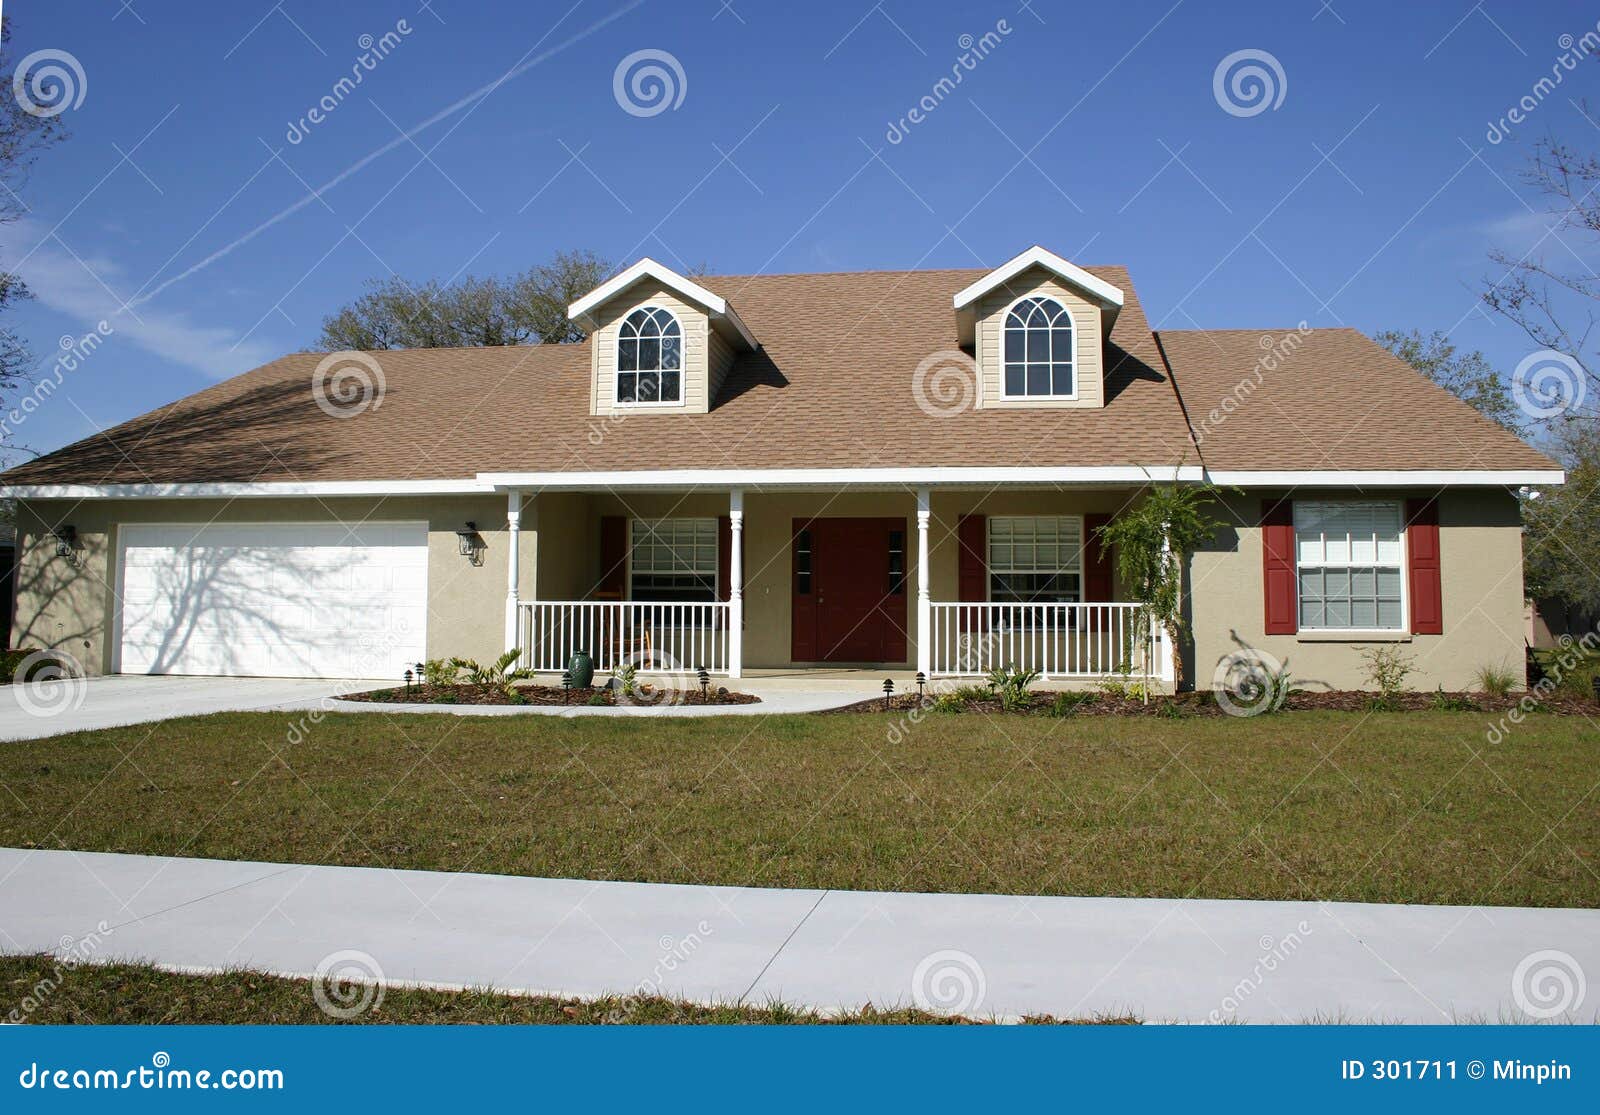 ranch house clipart - photo #33